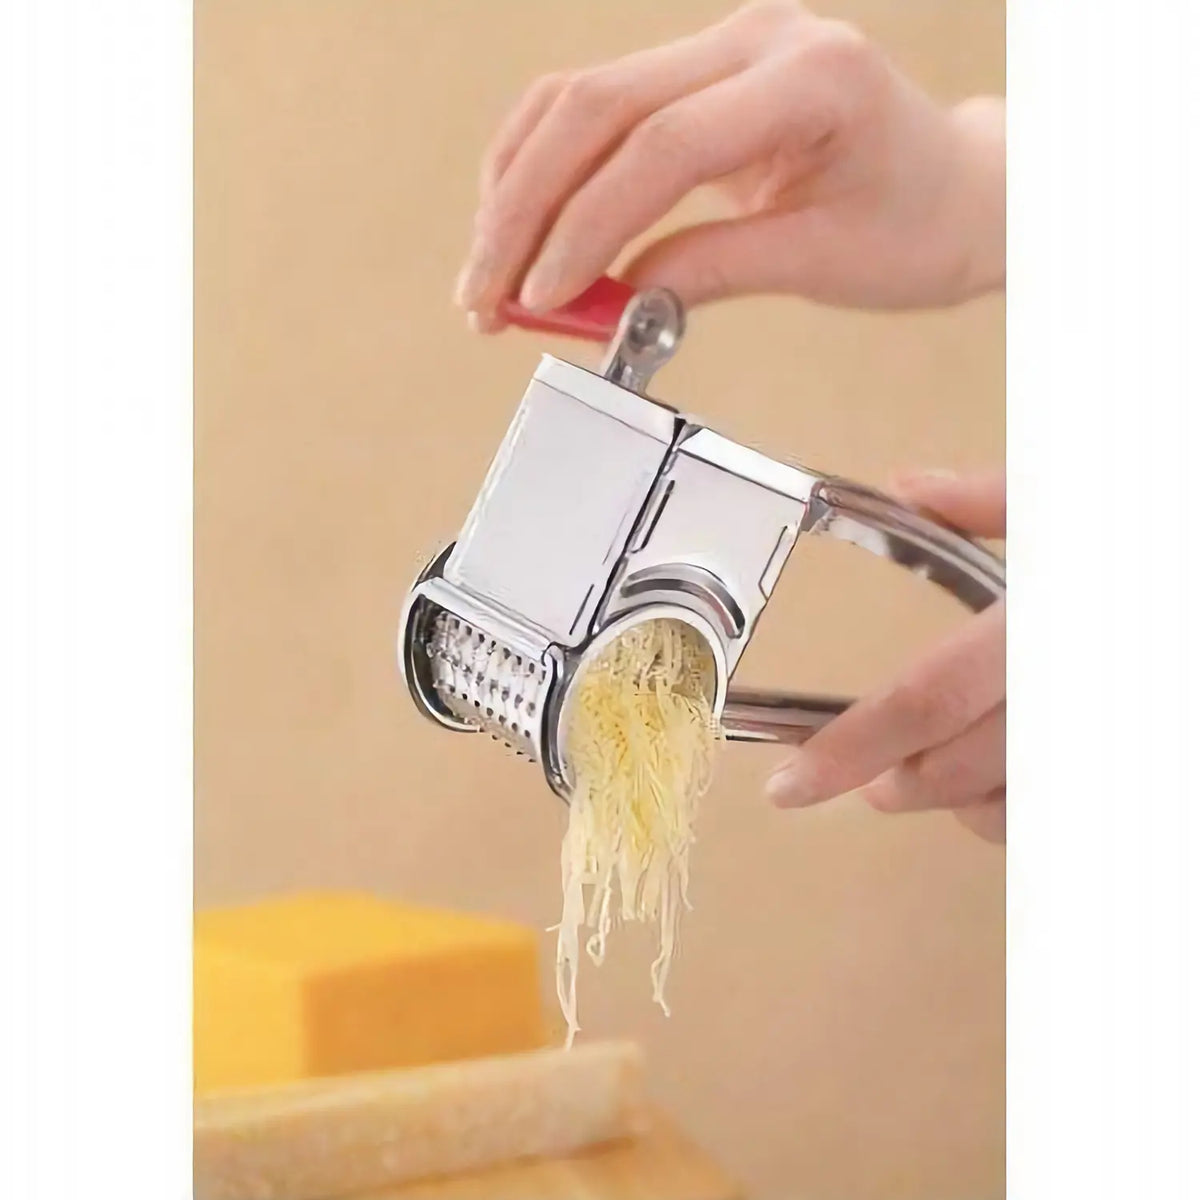  GOOG Home & Commercial Stainless Steel Manual Noodles